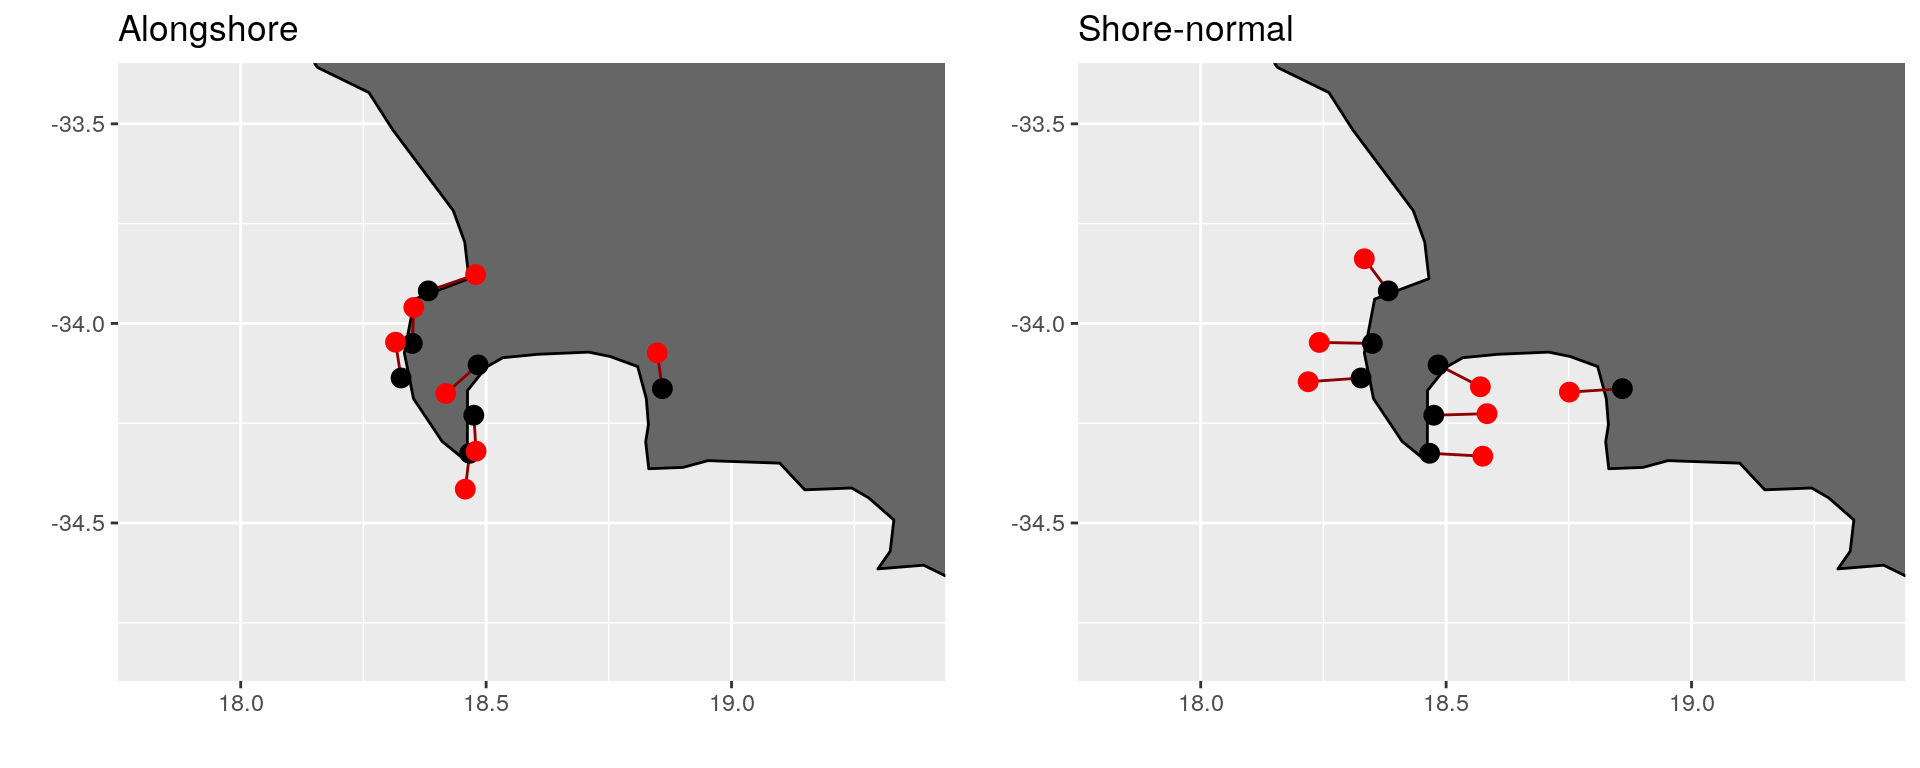 Alongshore and shore-normal transects around Cape Point and False Bay, South Africa.